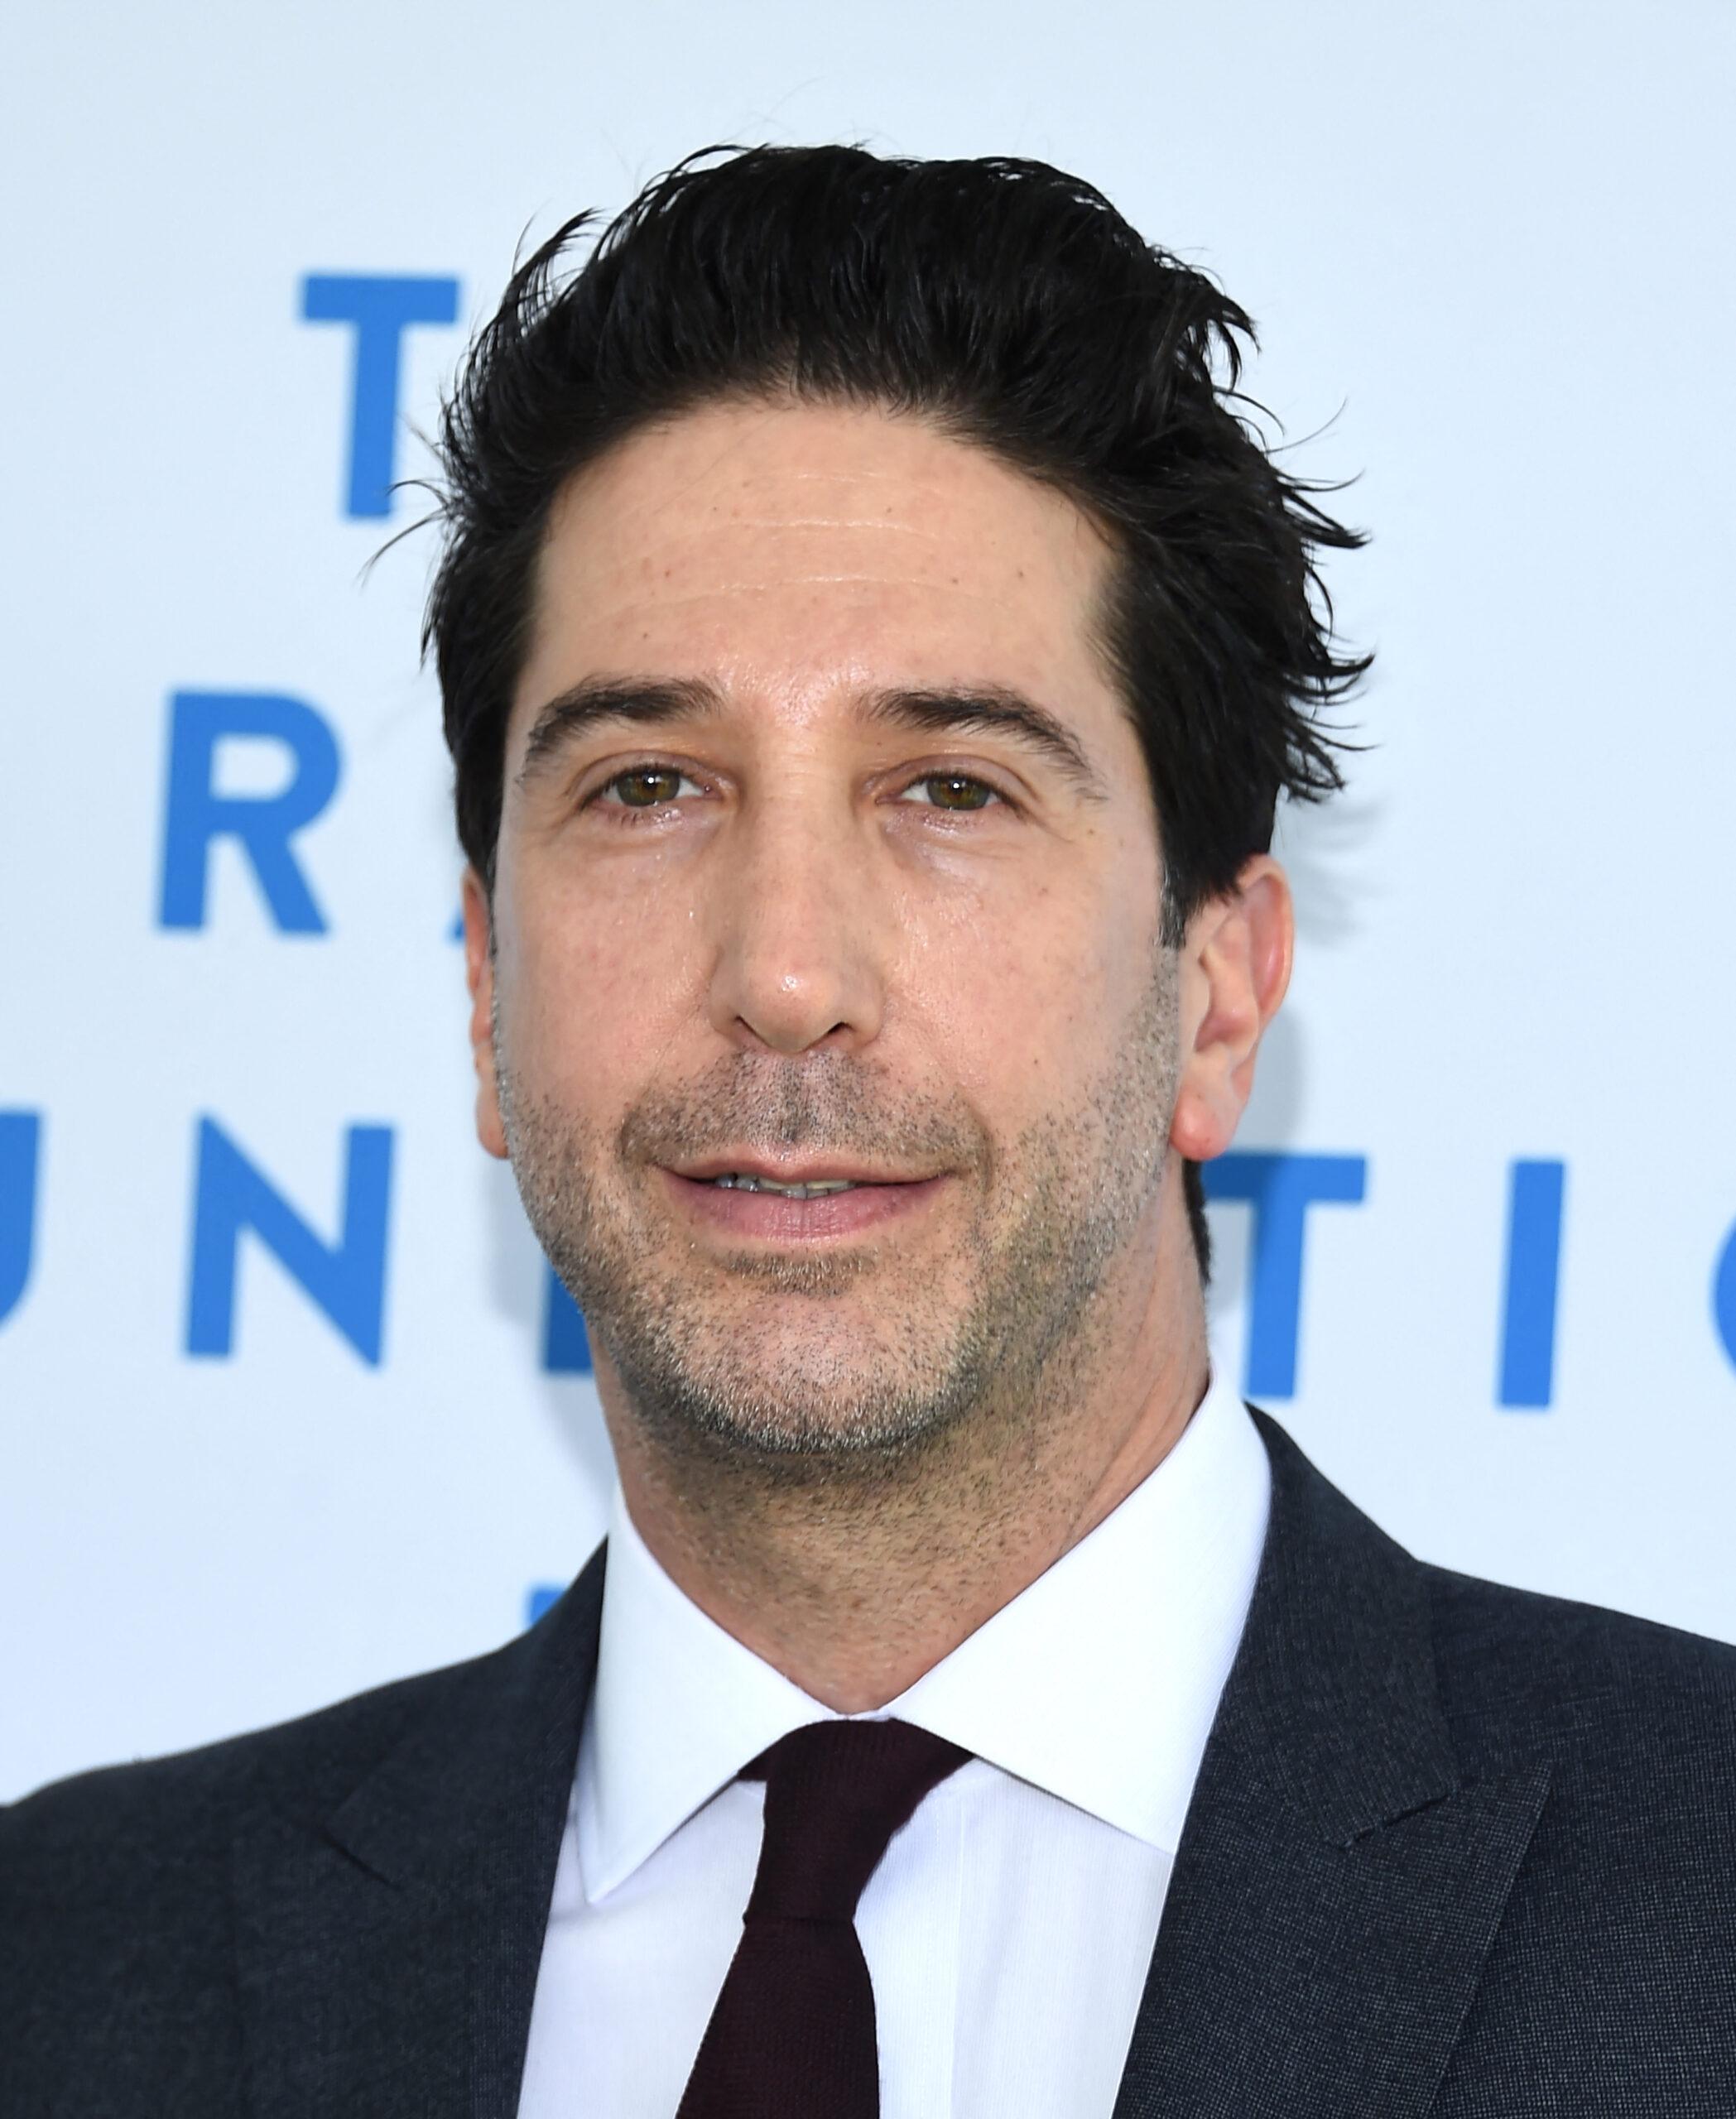 David Schwimmer Shares IG Story, But Remains Mum On Matthew Perry's Death